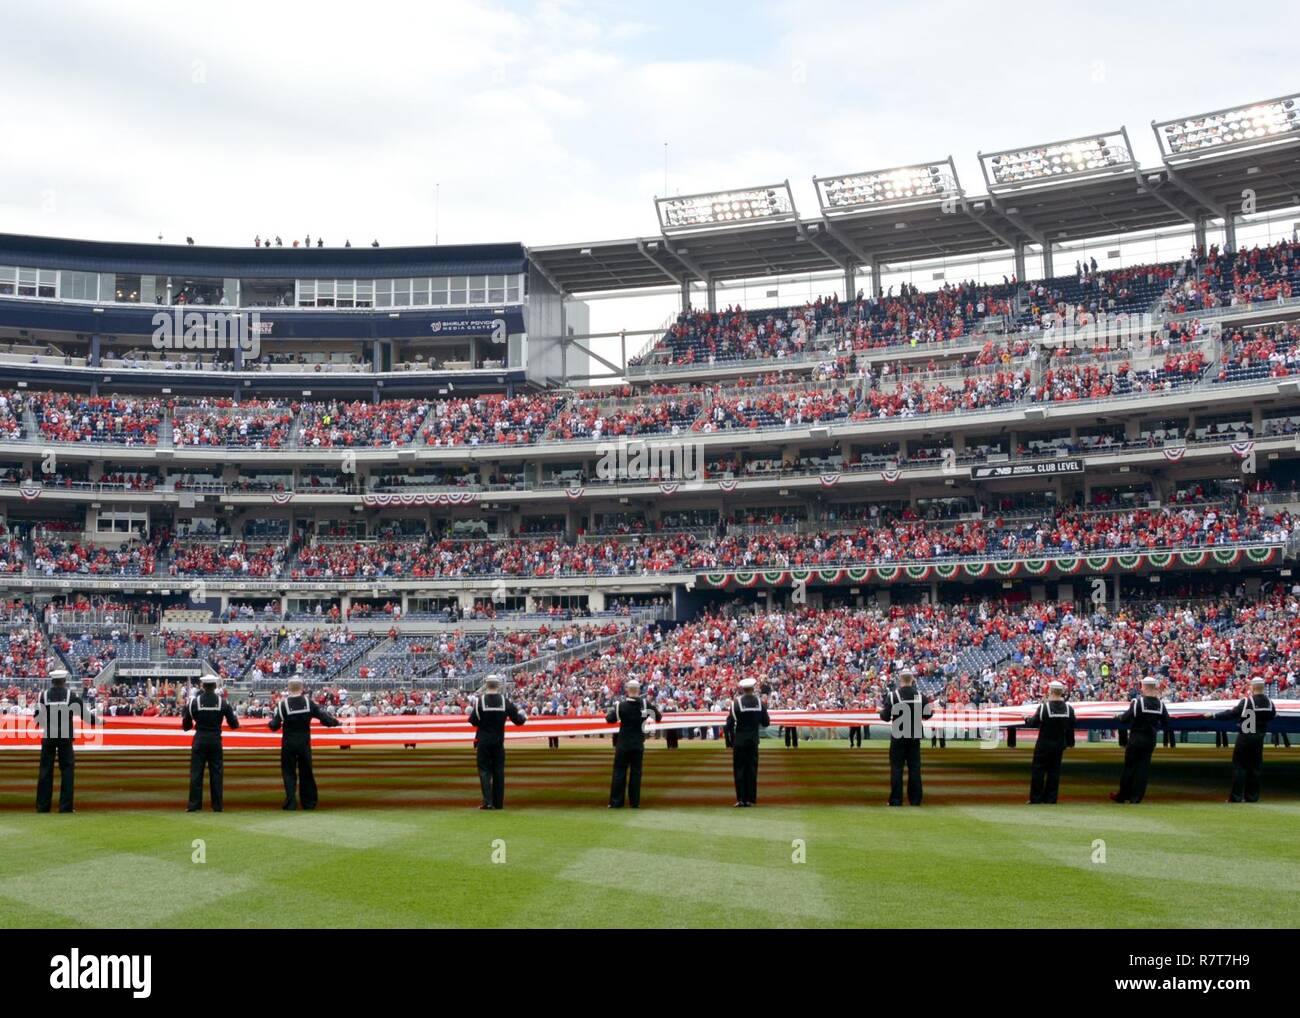 WASHINGTON (April. 3, 2017) Sailors assigned to the U.S. Navy Ceremonial Guard take part in an opening day ceremony during a Washington Nationals baseball game. Stock Photo